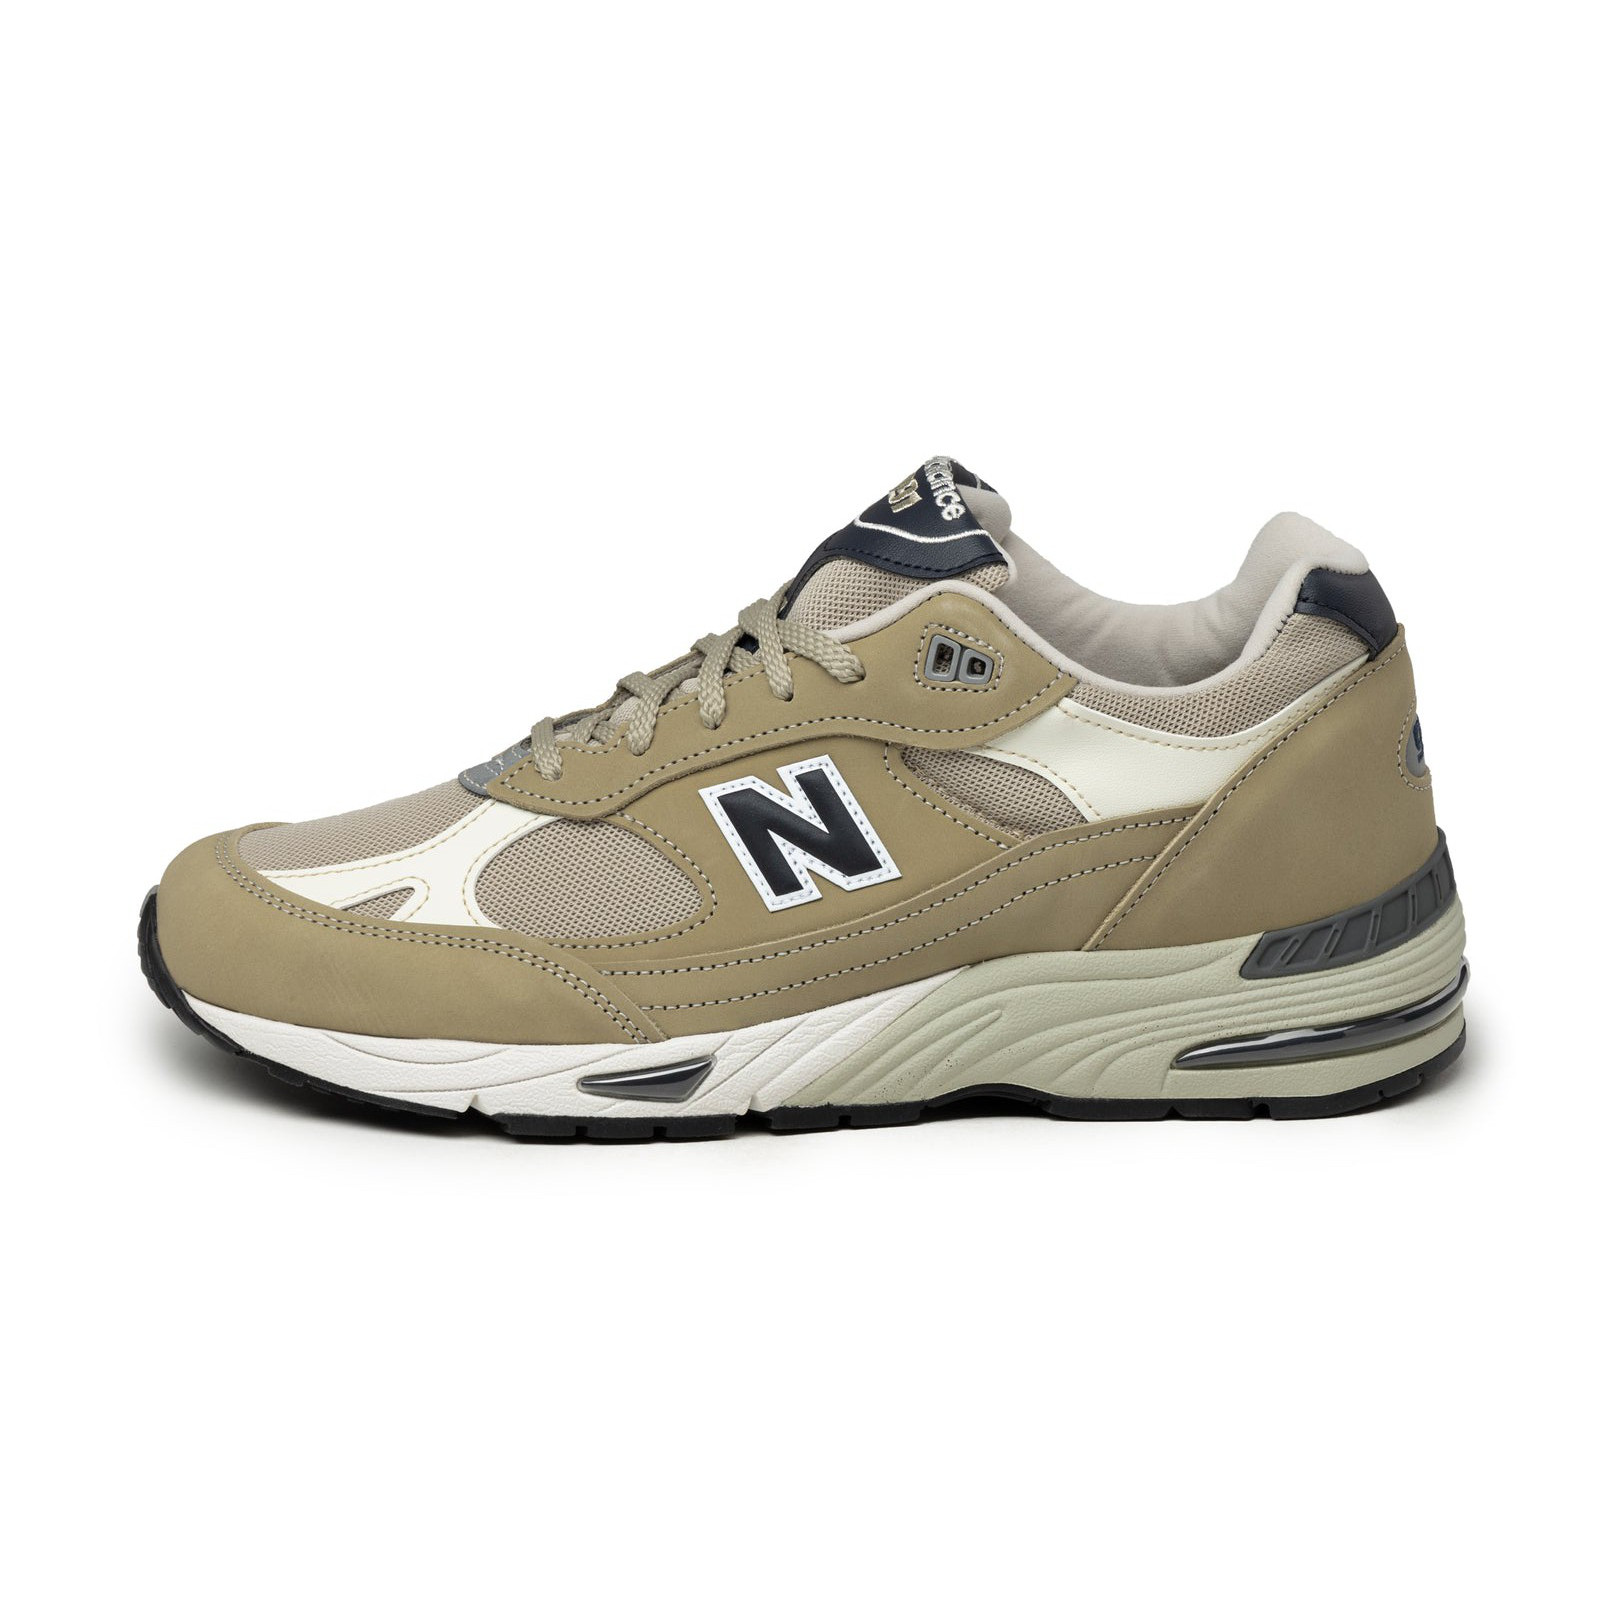 New Balance M991BTN
Made in England
Elm / Brown Rice